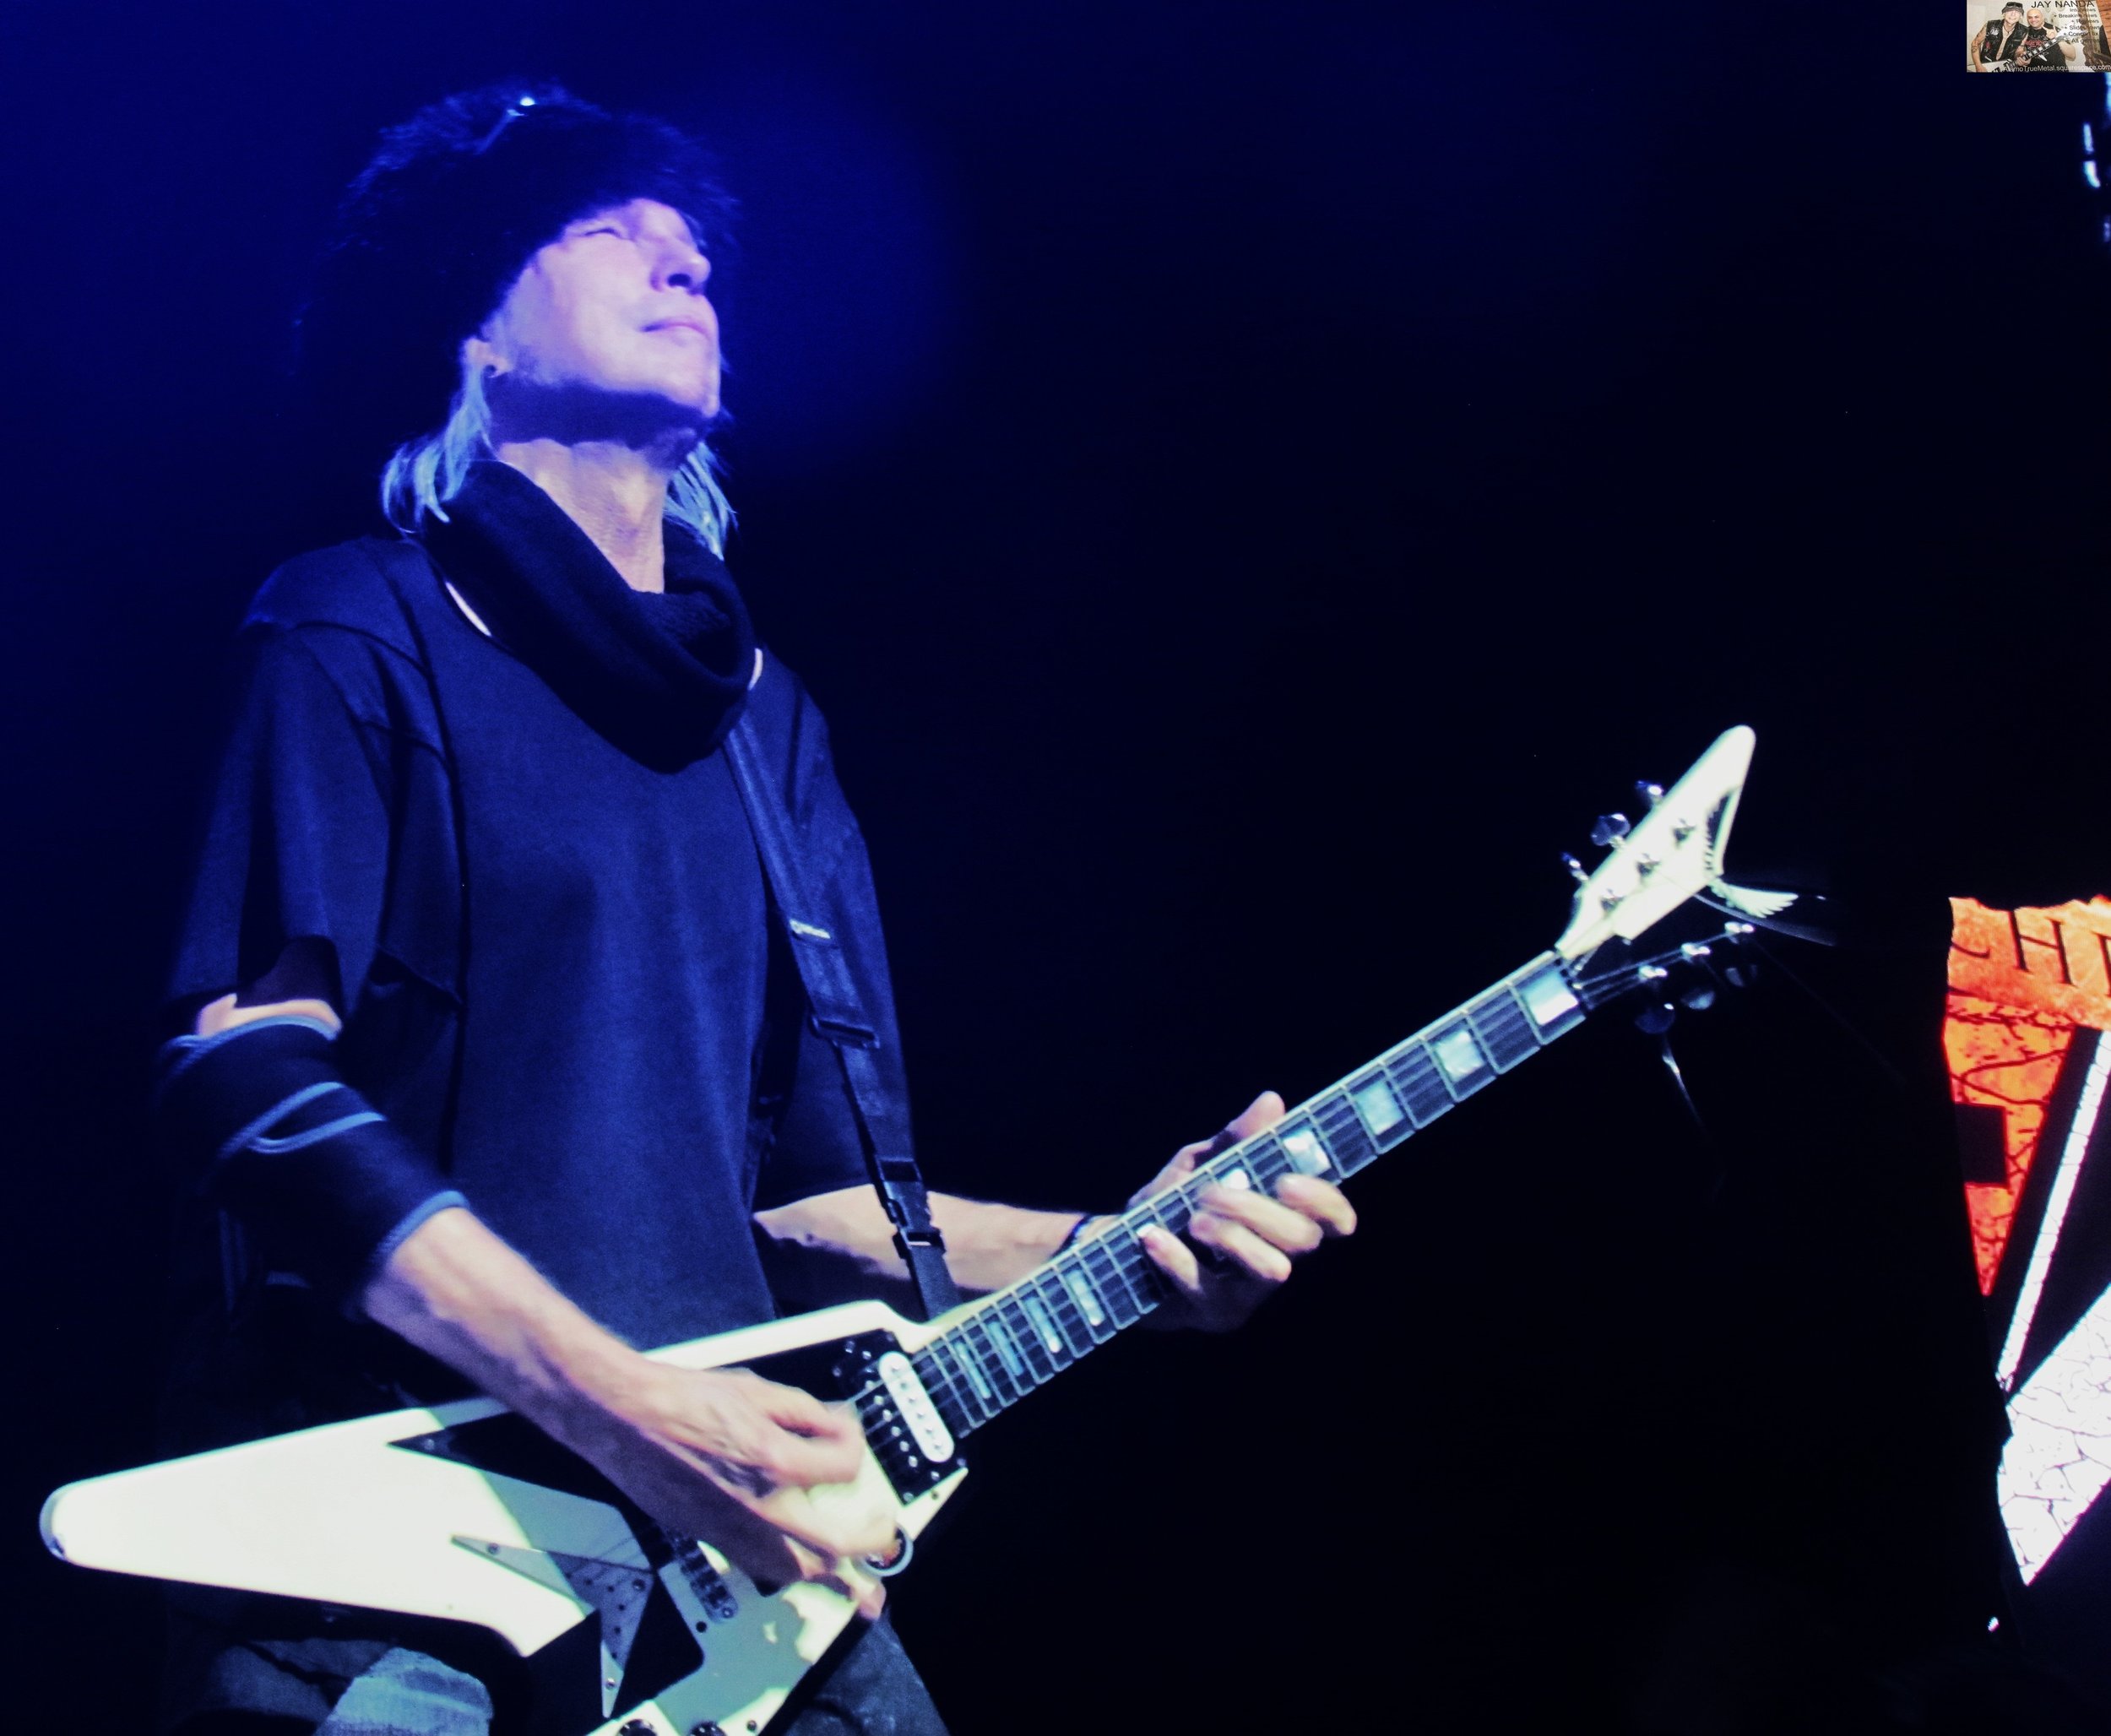  Michael Schenker celebrated his 50th anniversary tour Friday night at Tech Port Center + Arena by providing direct support to W.A.S.P.’s 40th anniversary show (photos by Jay Nanda / Alamo True Metal).  